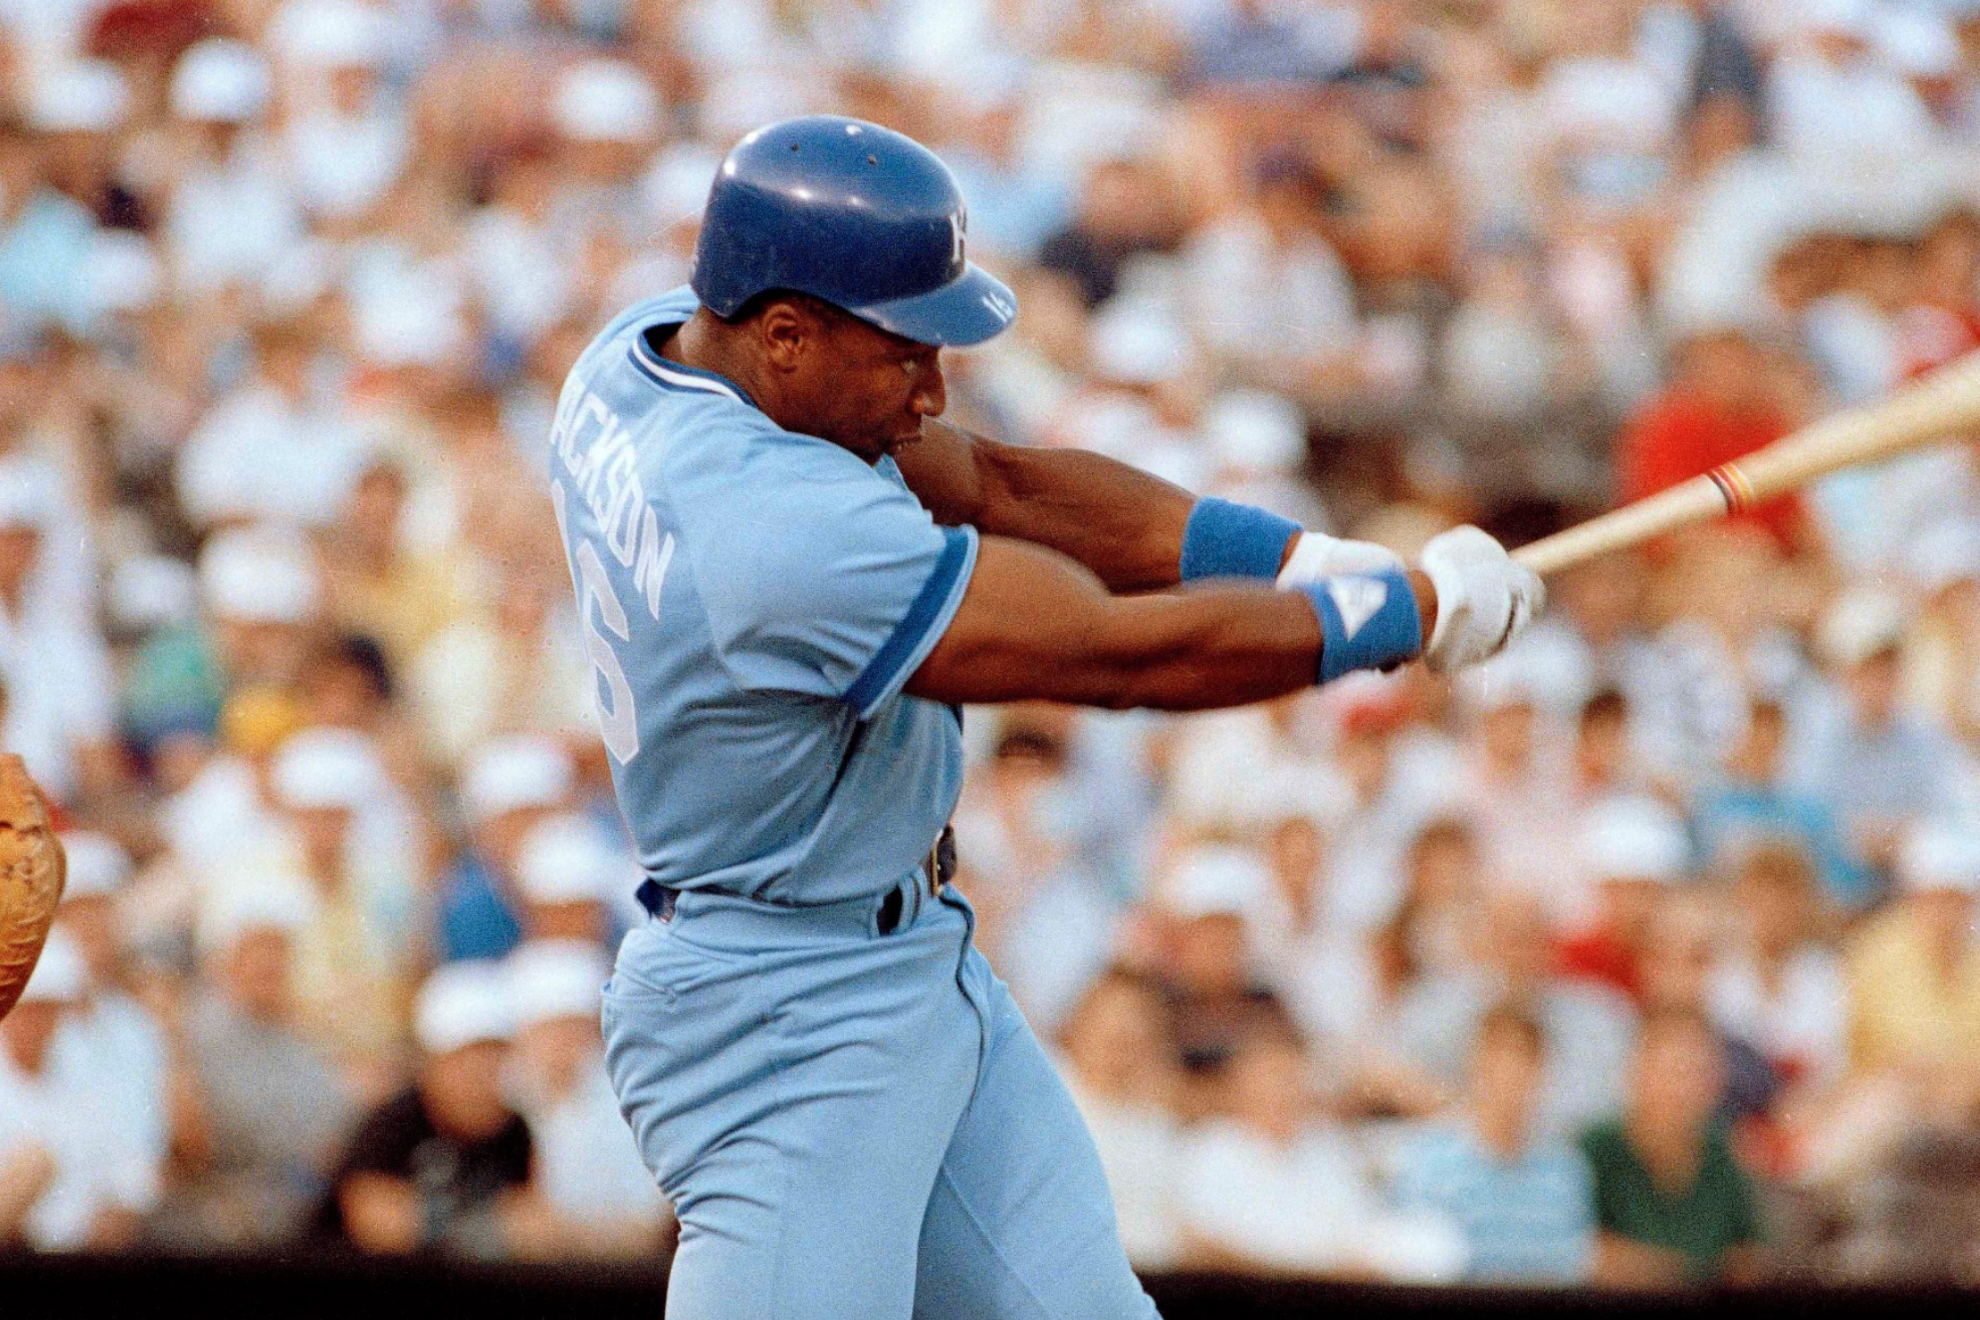 Bo Jackson wins $21 million in damages in civil case against his own niece and nephew